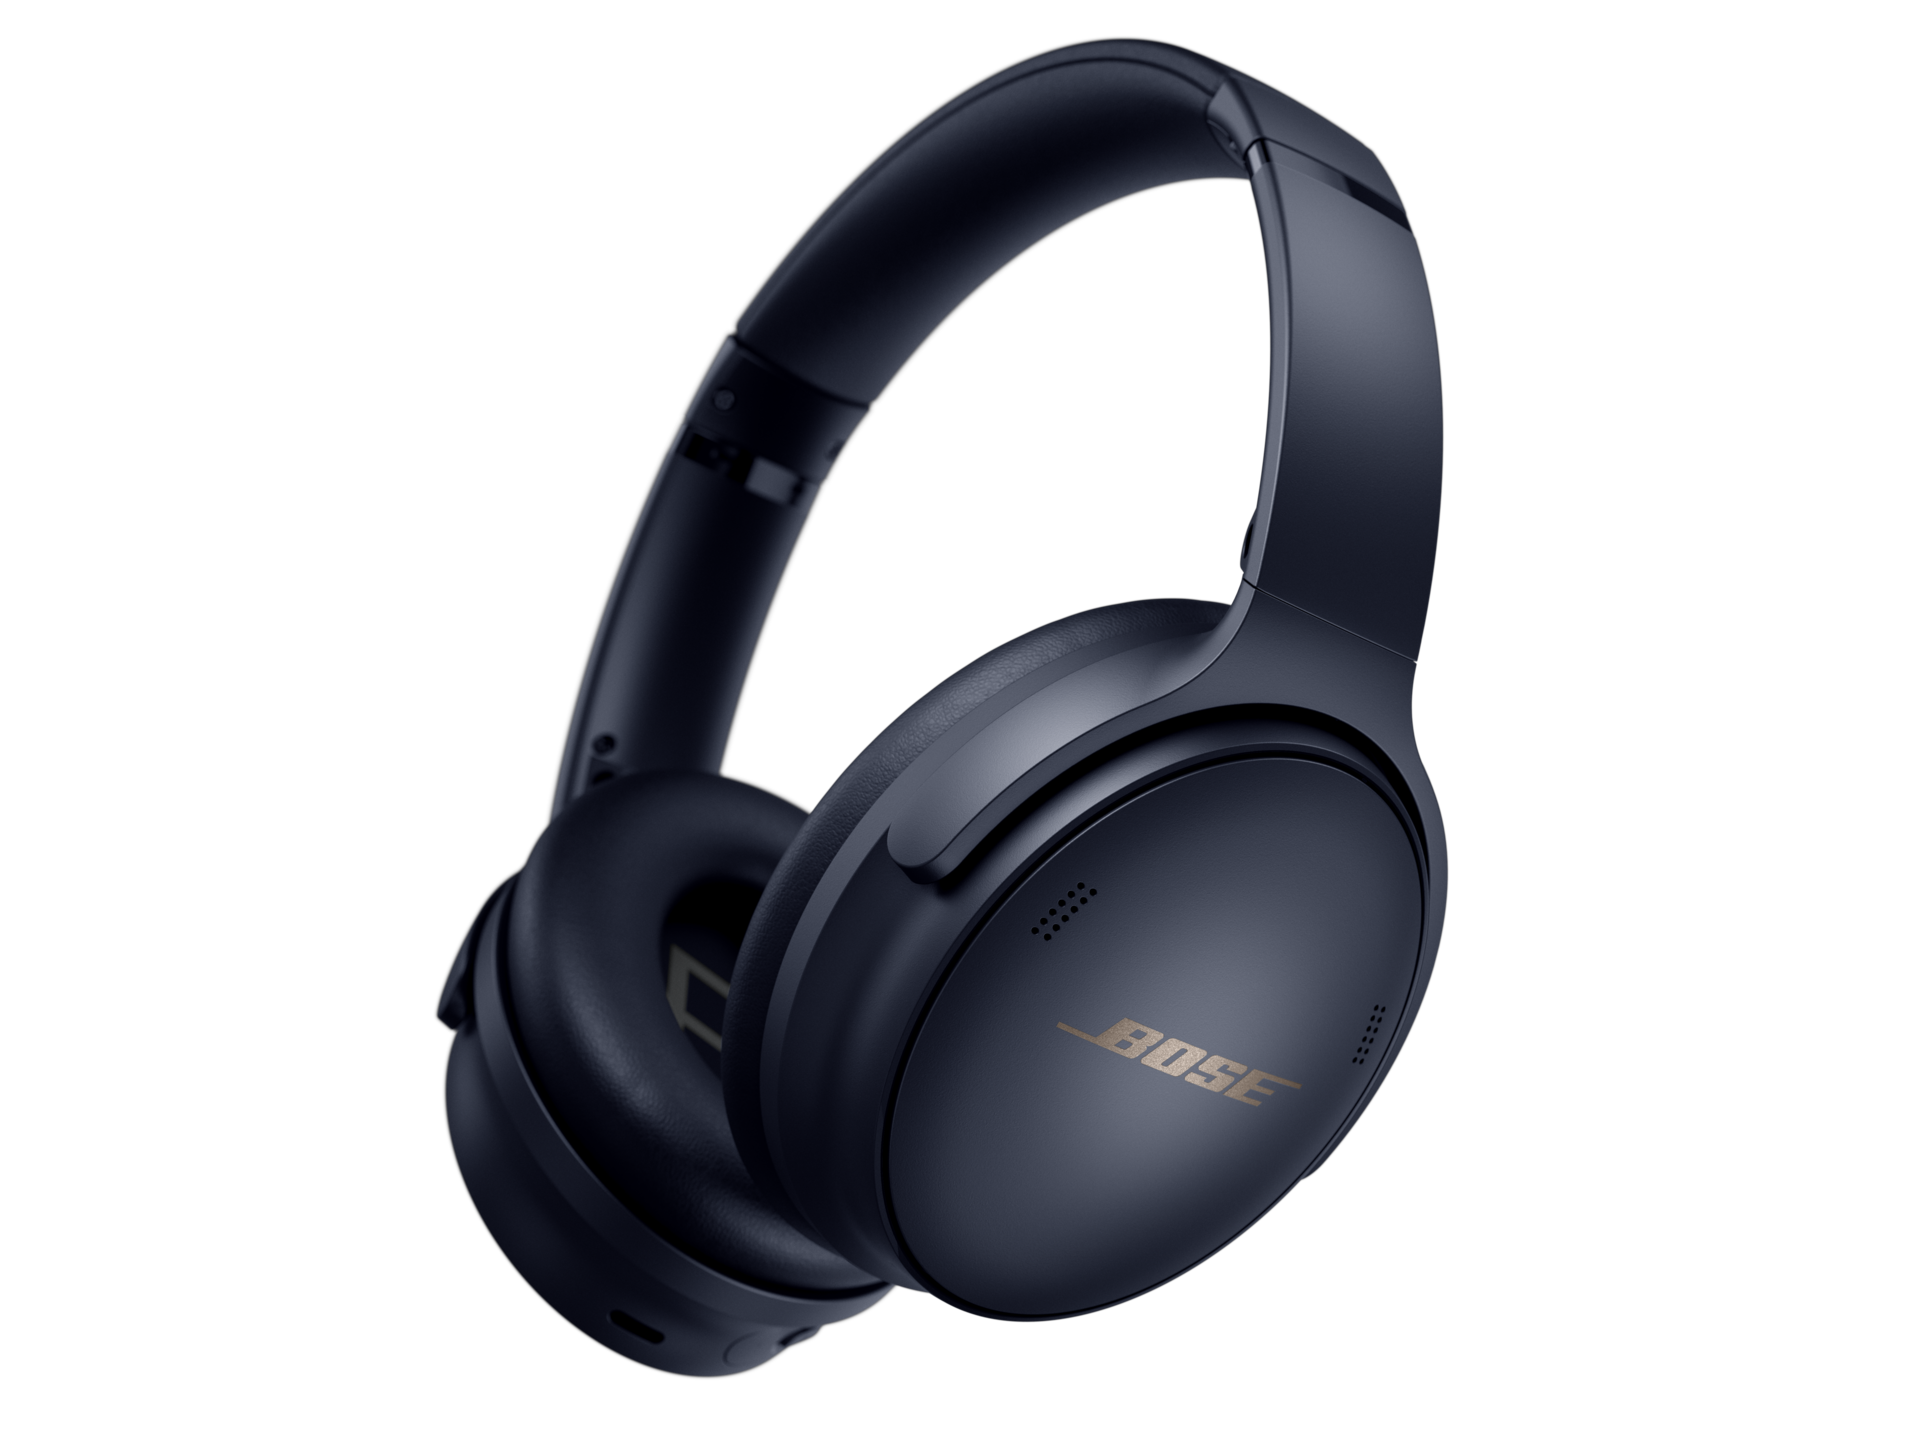  Bose QuietComfort Wireless Noise Cancelling Headphones,  Bluetooth Over Ear Headphones with Up To 24 Hours of Battery Life, Black :  Electronics